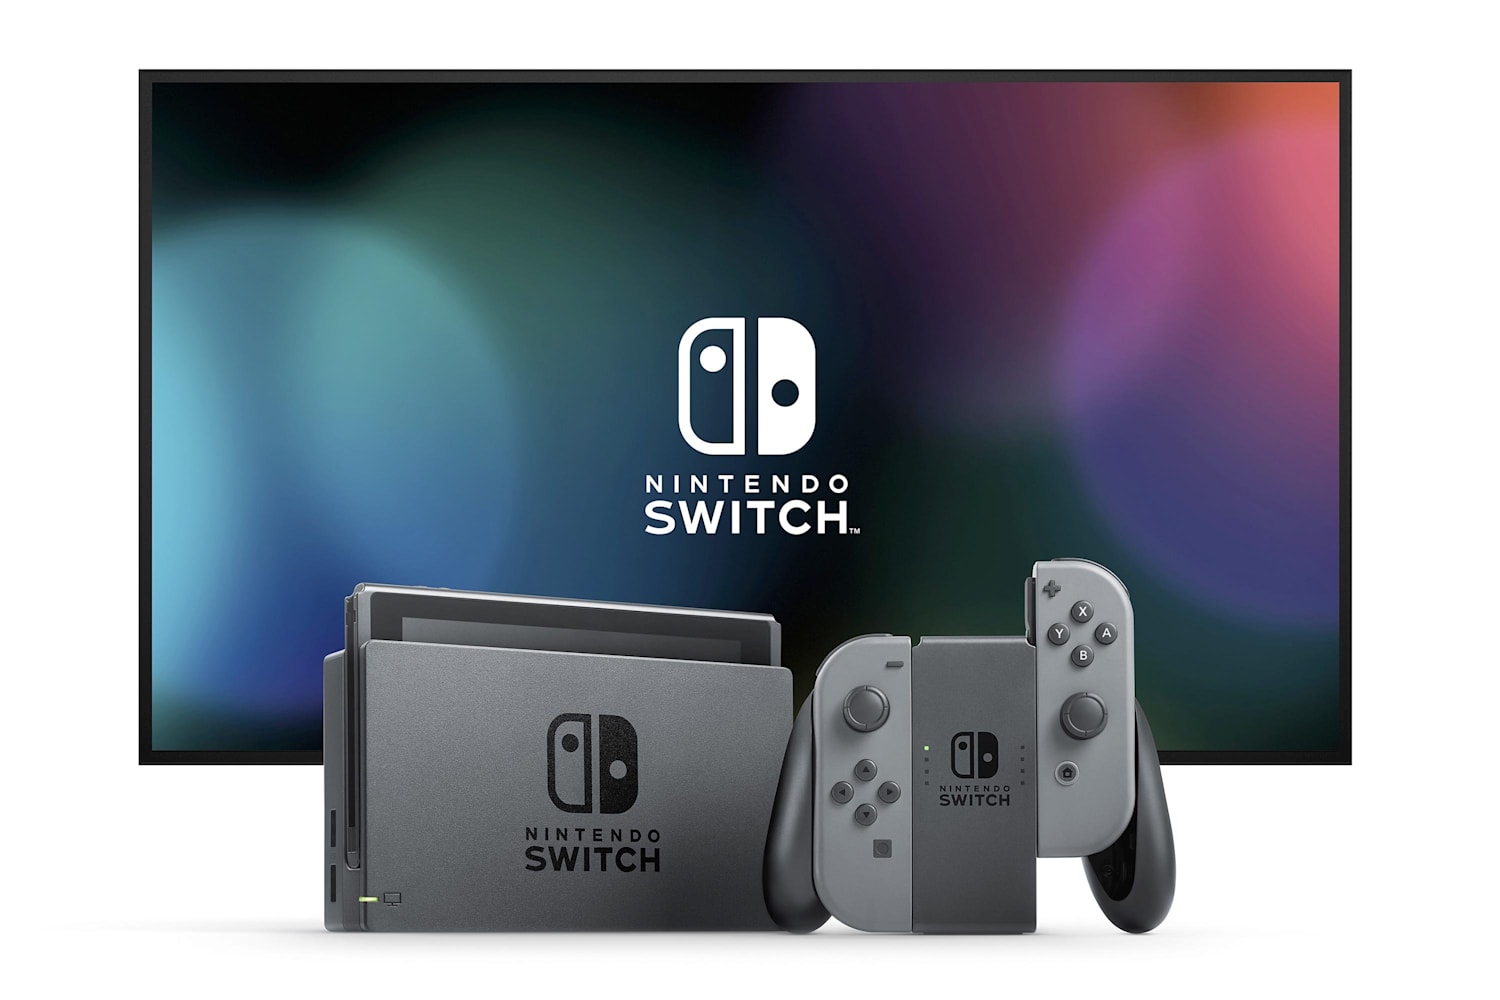 nintendo switch price in rupees